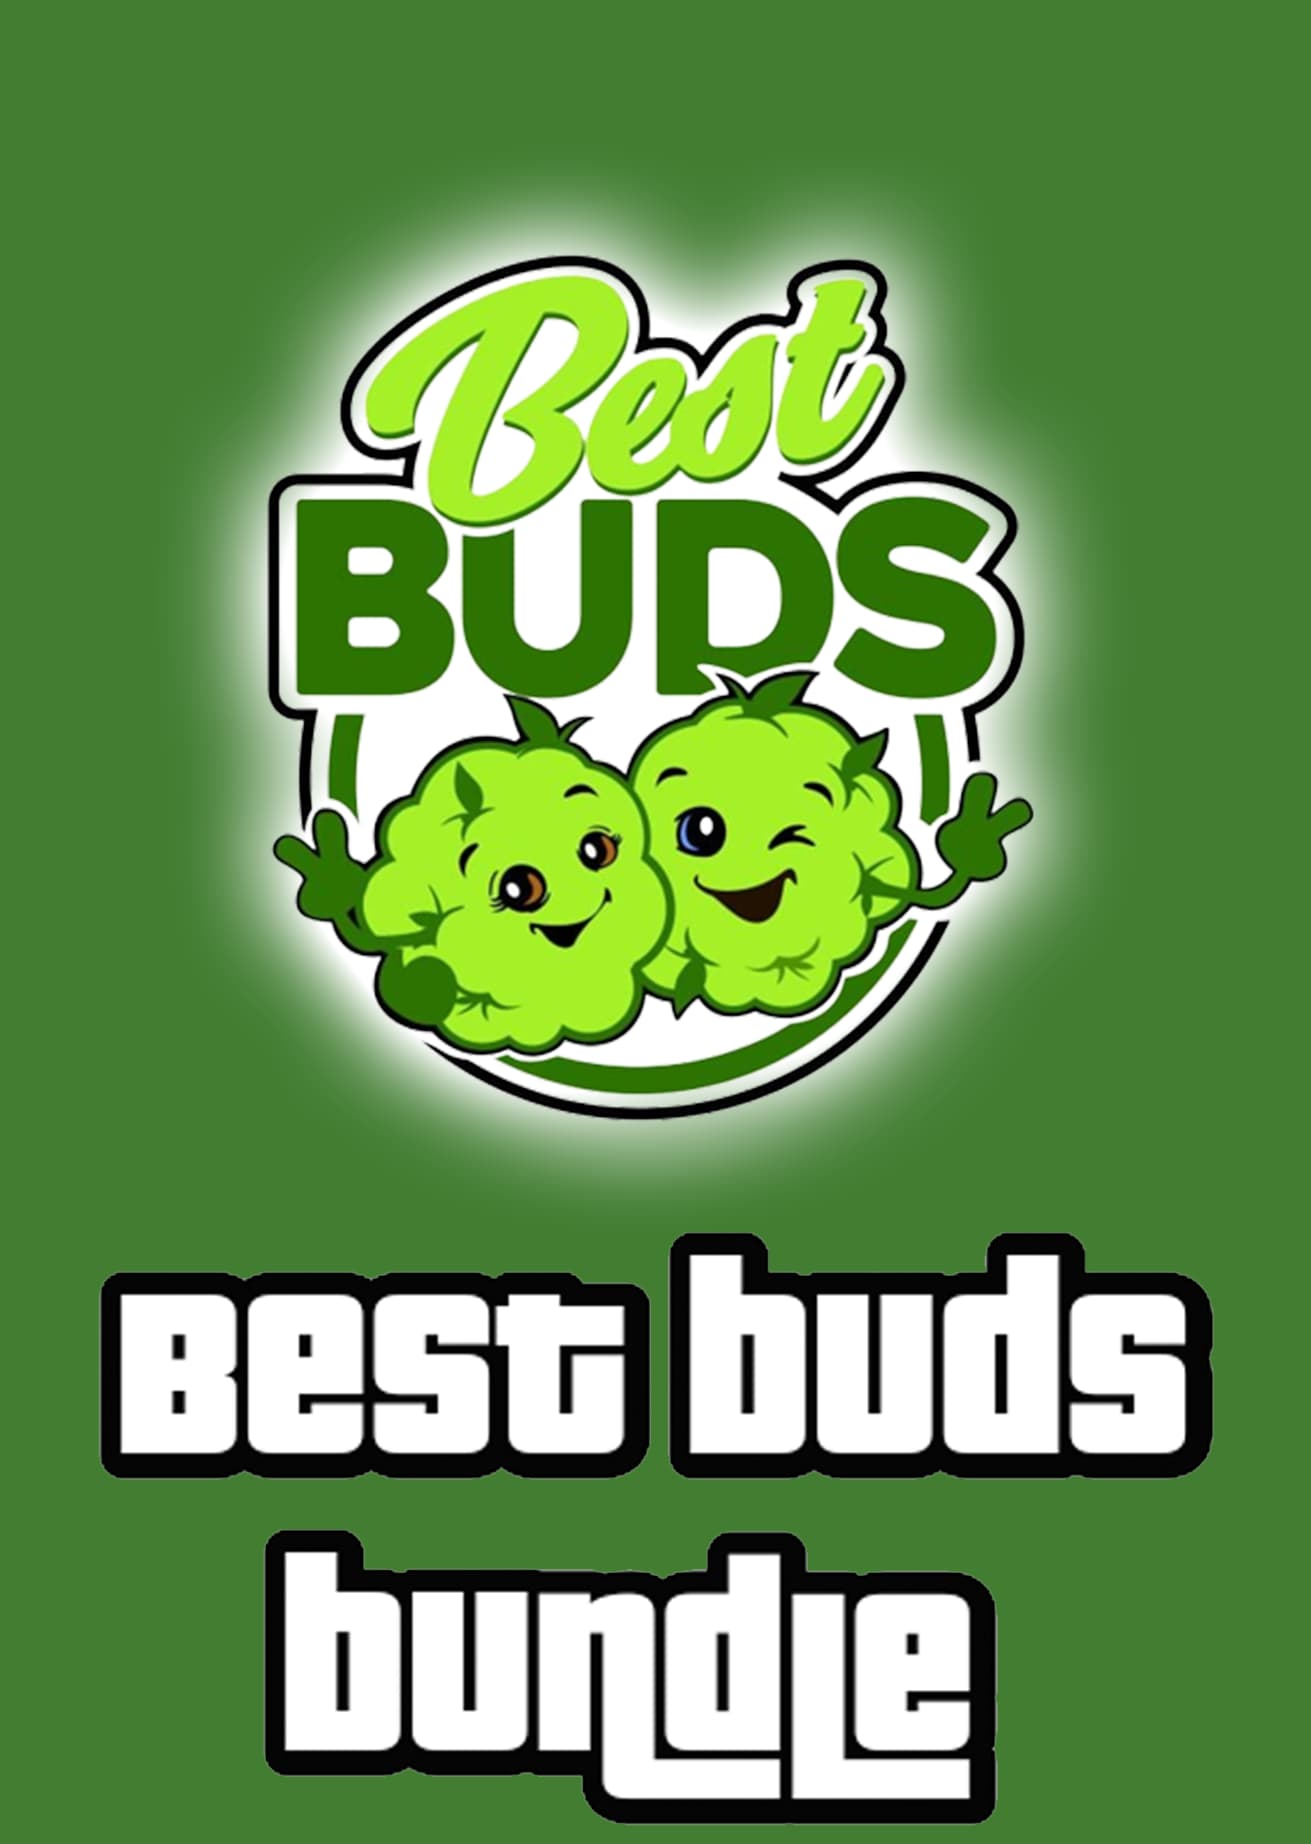 [NEW] Best Buds Uniforms! Releases Cfx.re Community